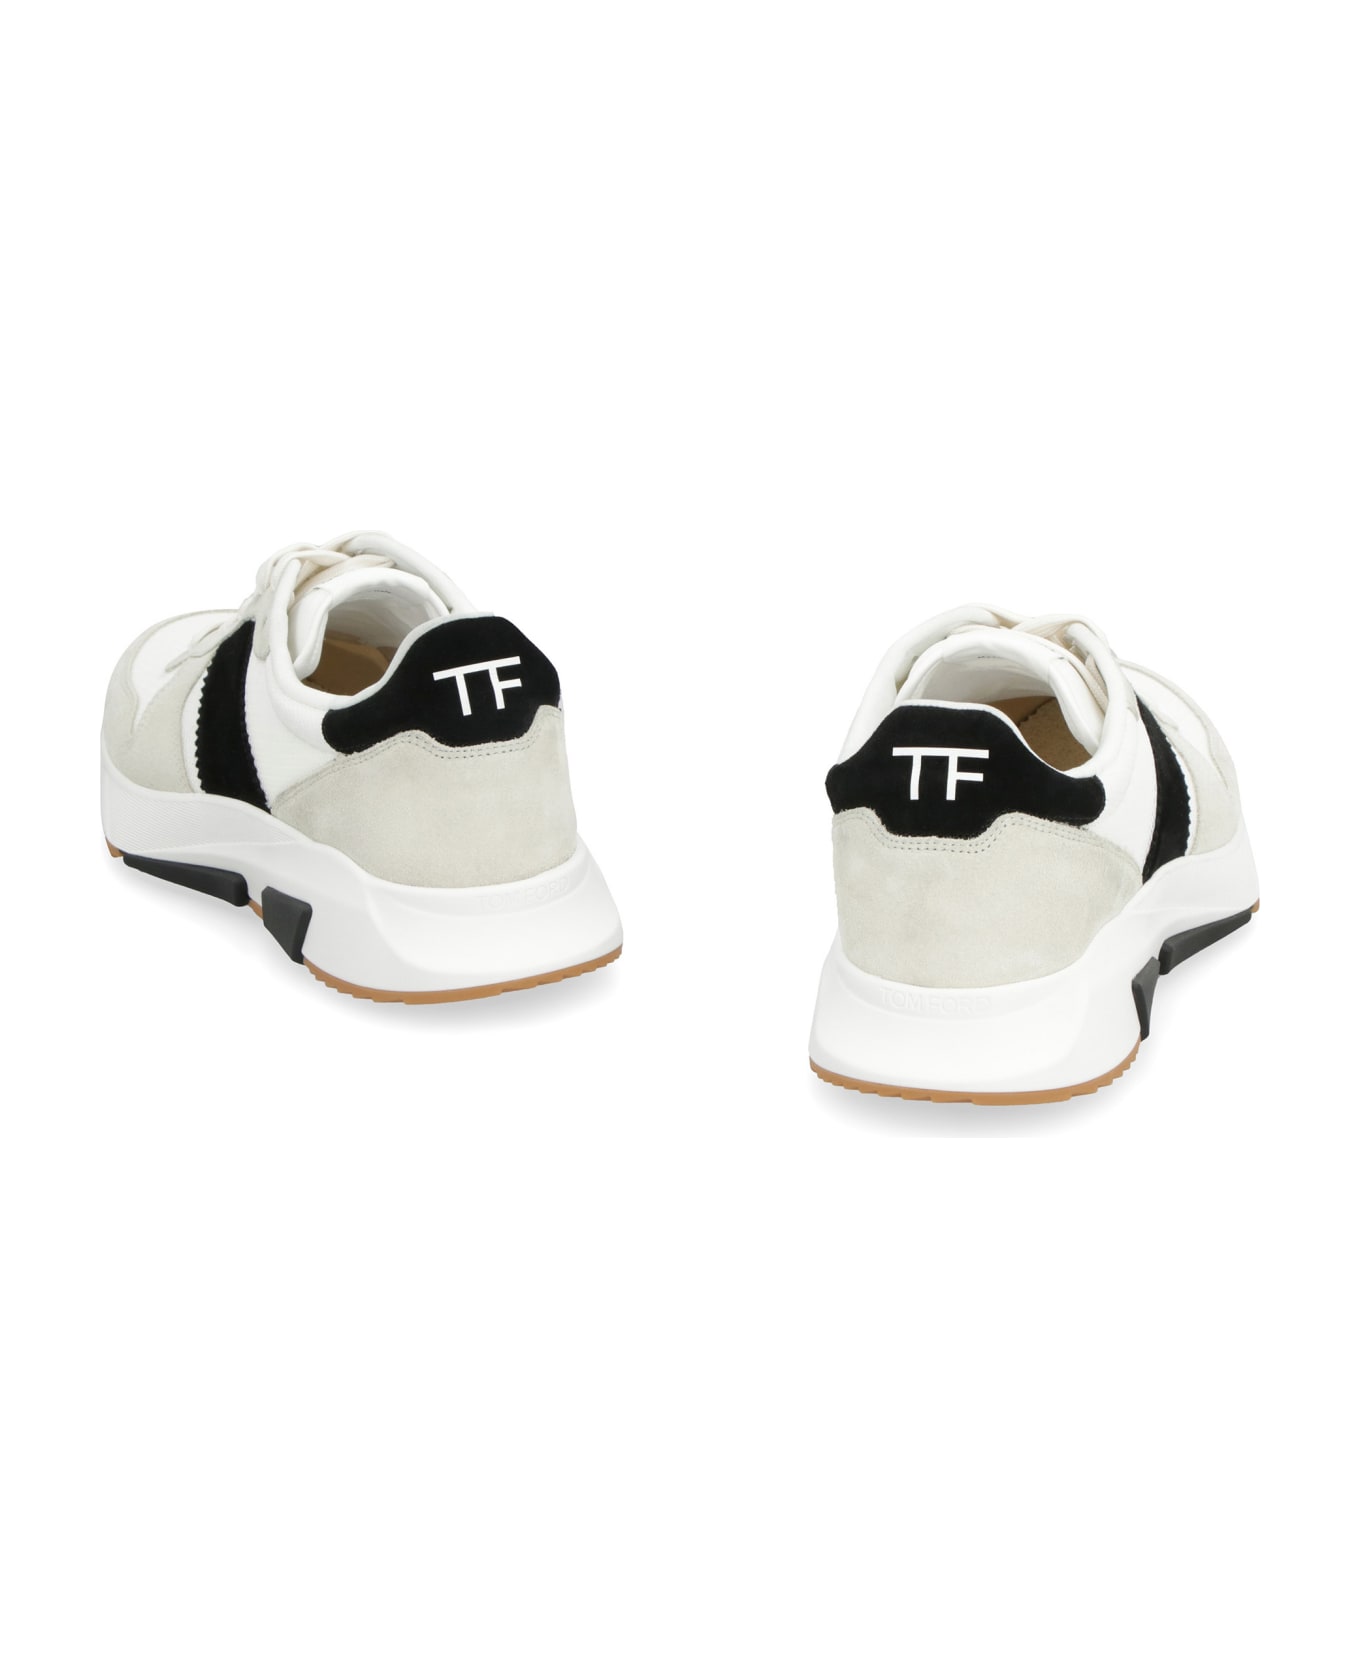 Tom Ford Leather And Fabric Low-top Sneakers - WHITE/BLACK